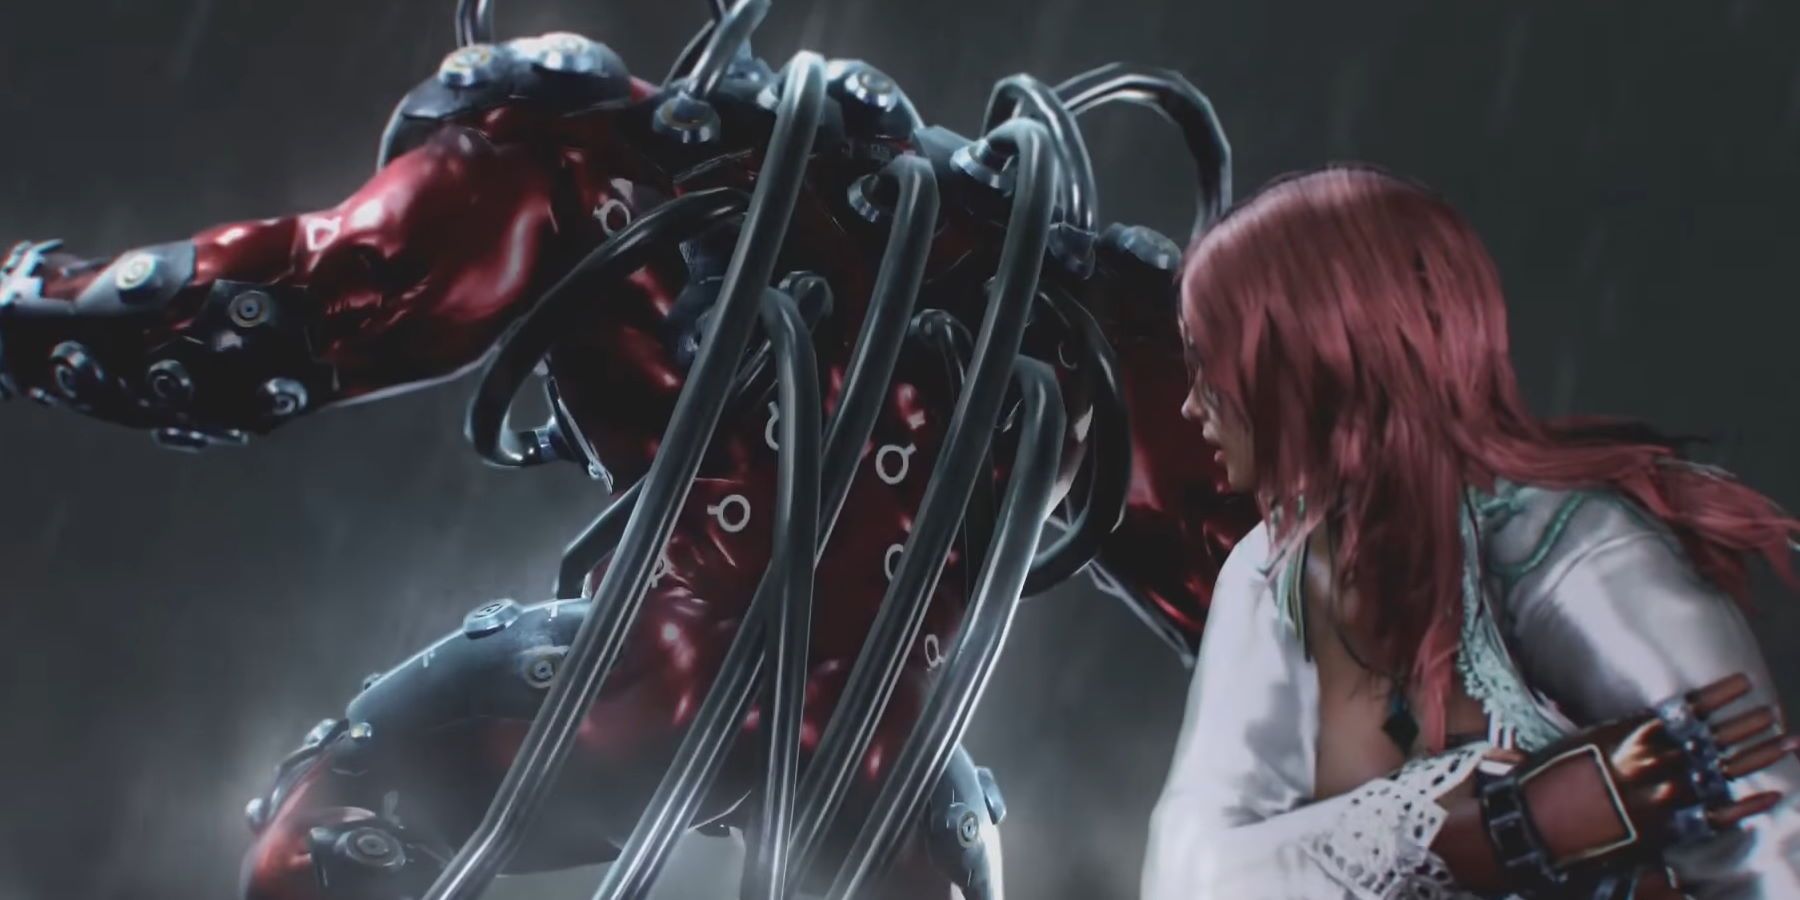 Gigas protecting Katarina while she looks in shock